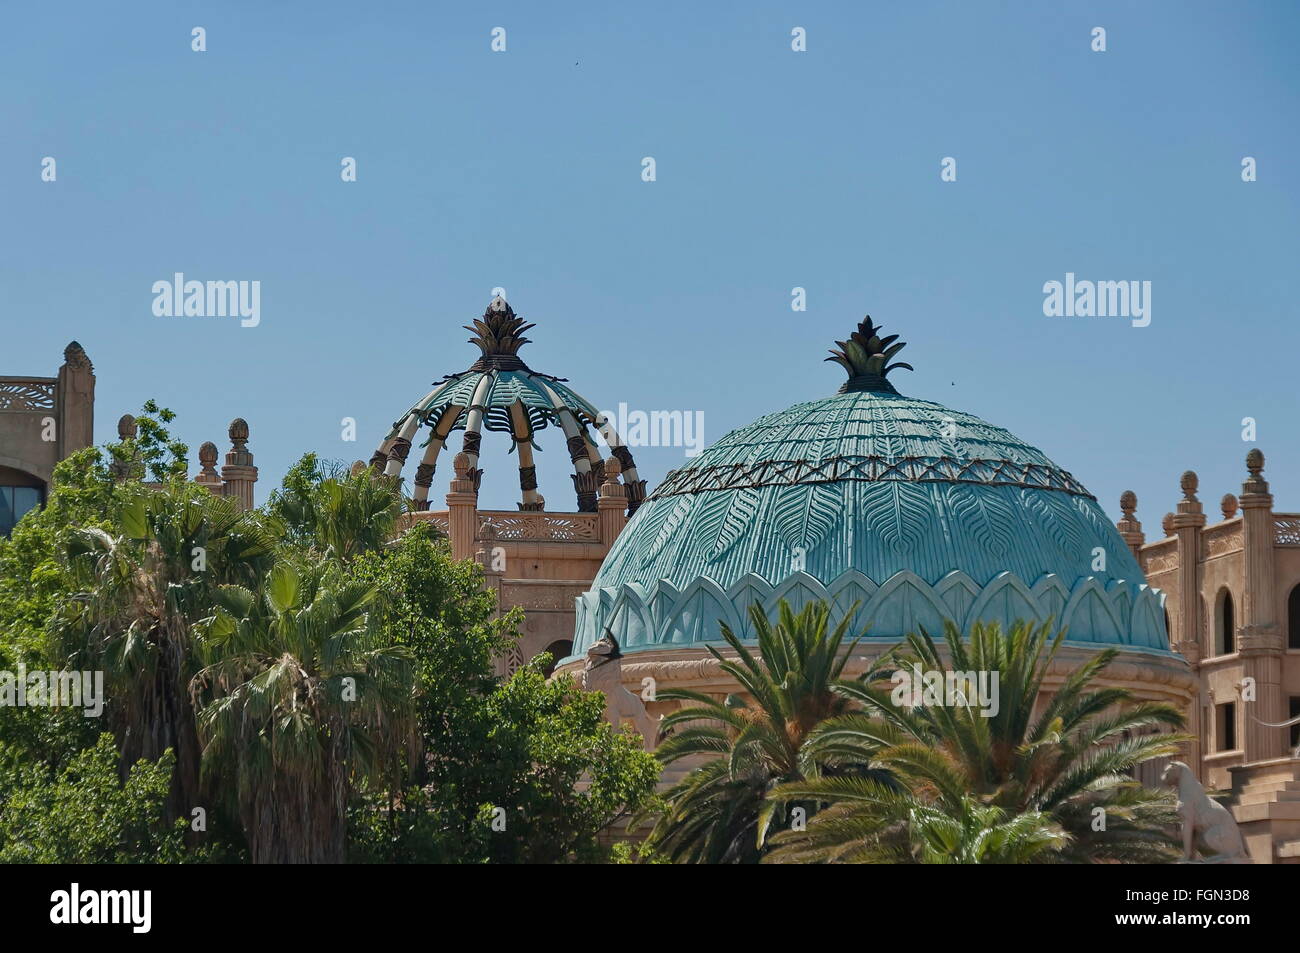 Fragment of Palace of the Lost City hotel in Sun City, South Africa Stock Photo